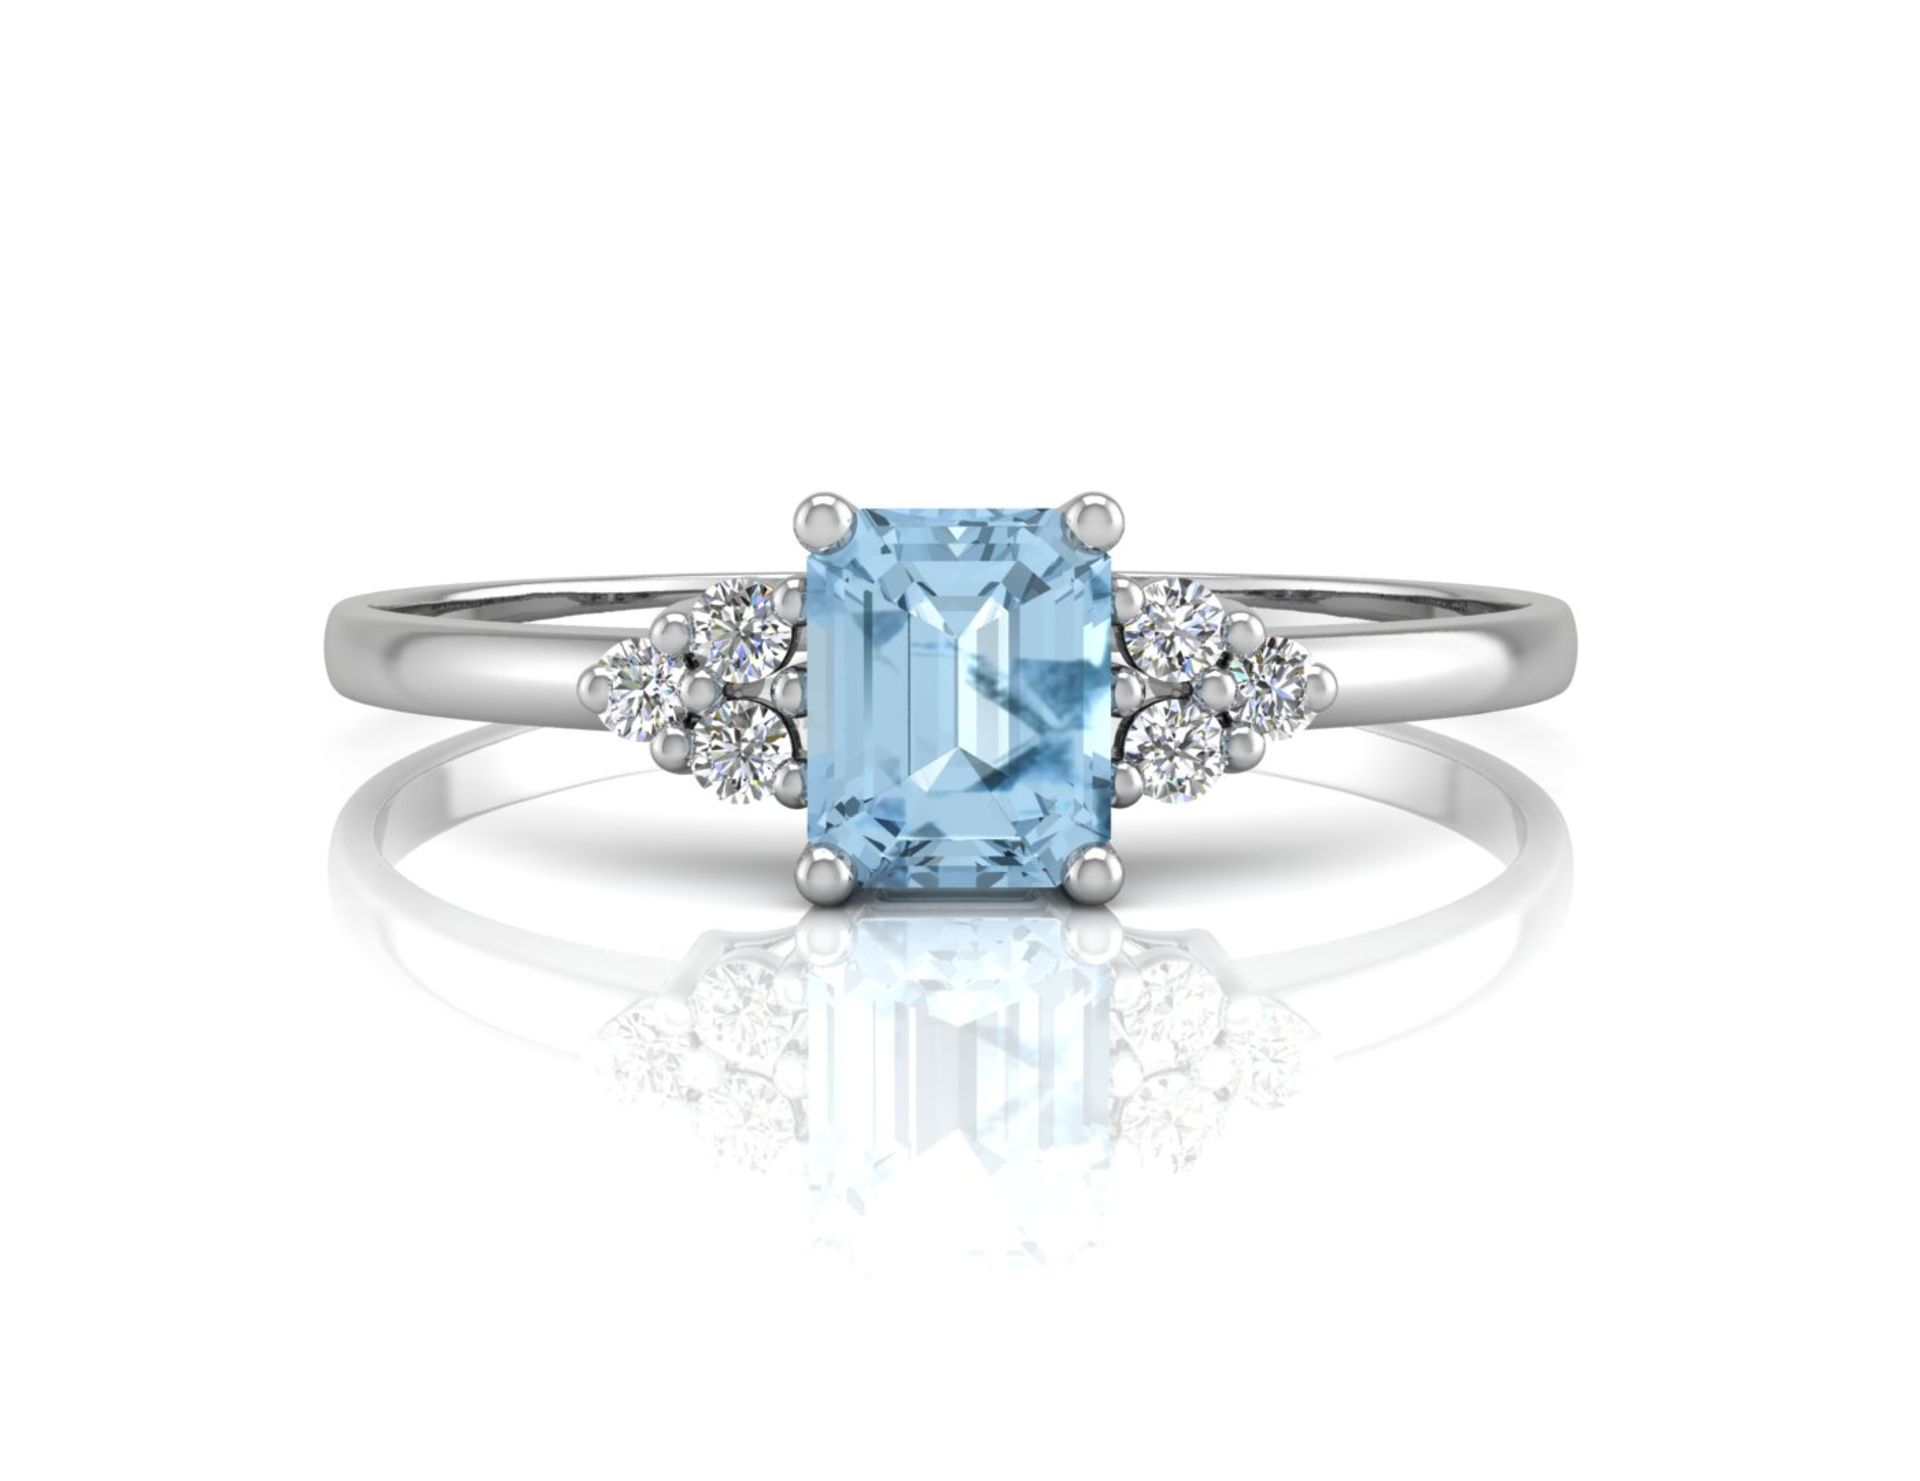 9ct White Gold Fancy Cluster Diamond Blue Topaz Ring (BT0.61) 0.06 Carats - Valued By GIE £1,455. - Image 4 of 5